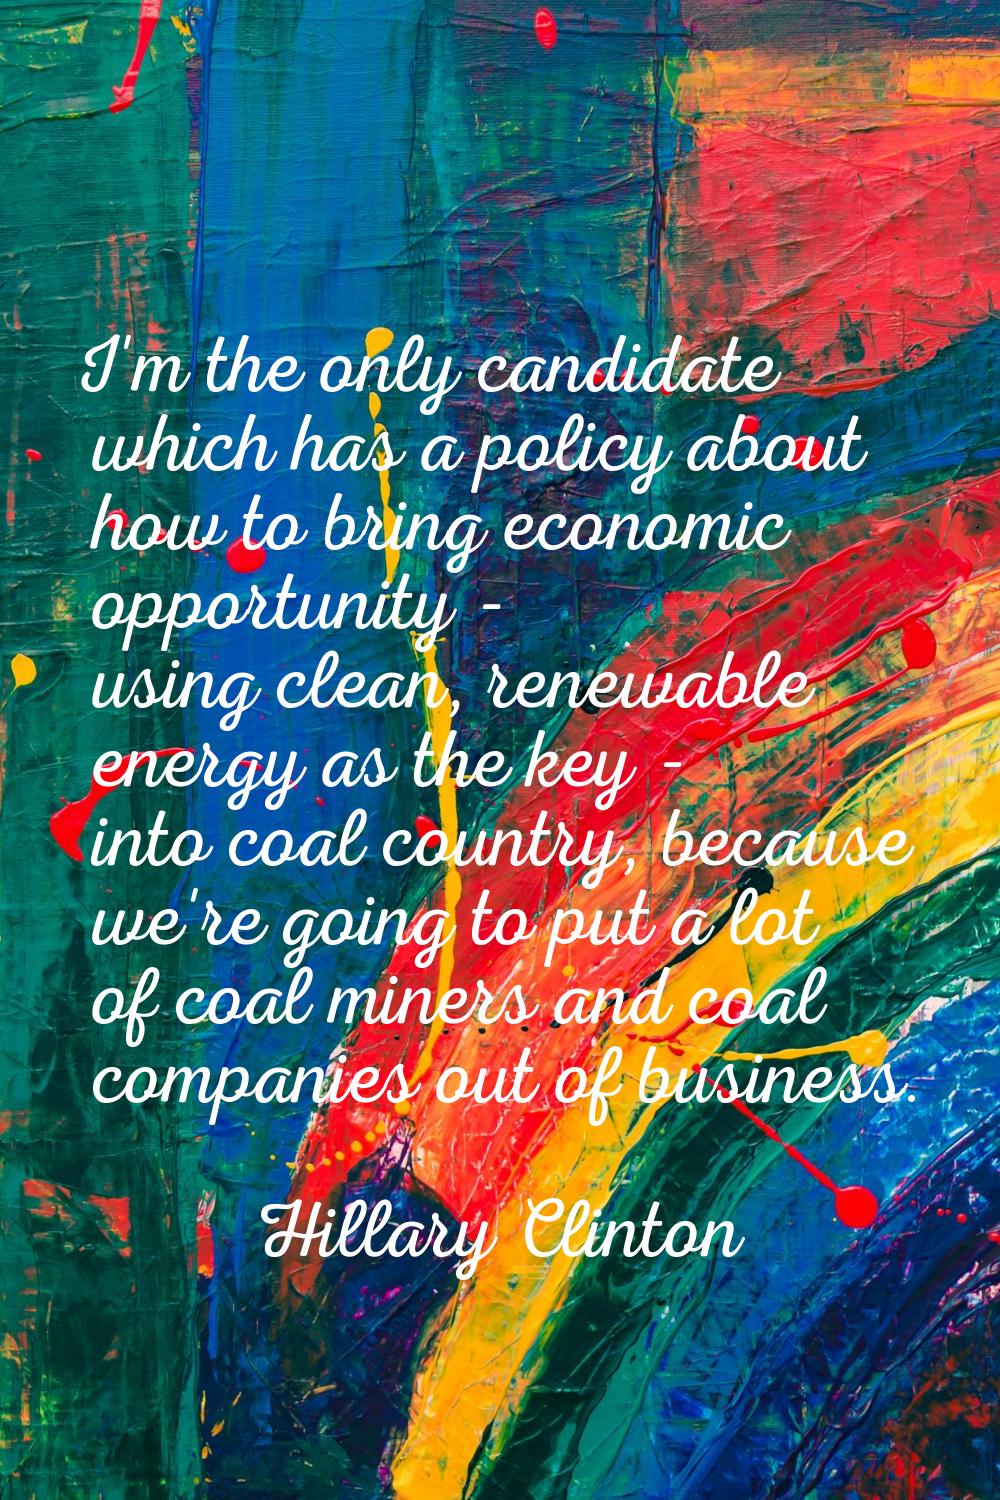 I'm the only candidate which has a policy about how to bring economic opportunity - using clean, re